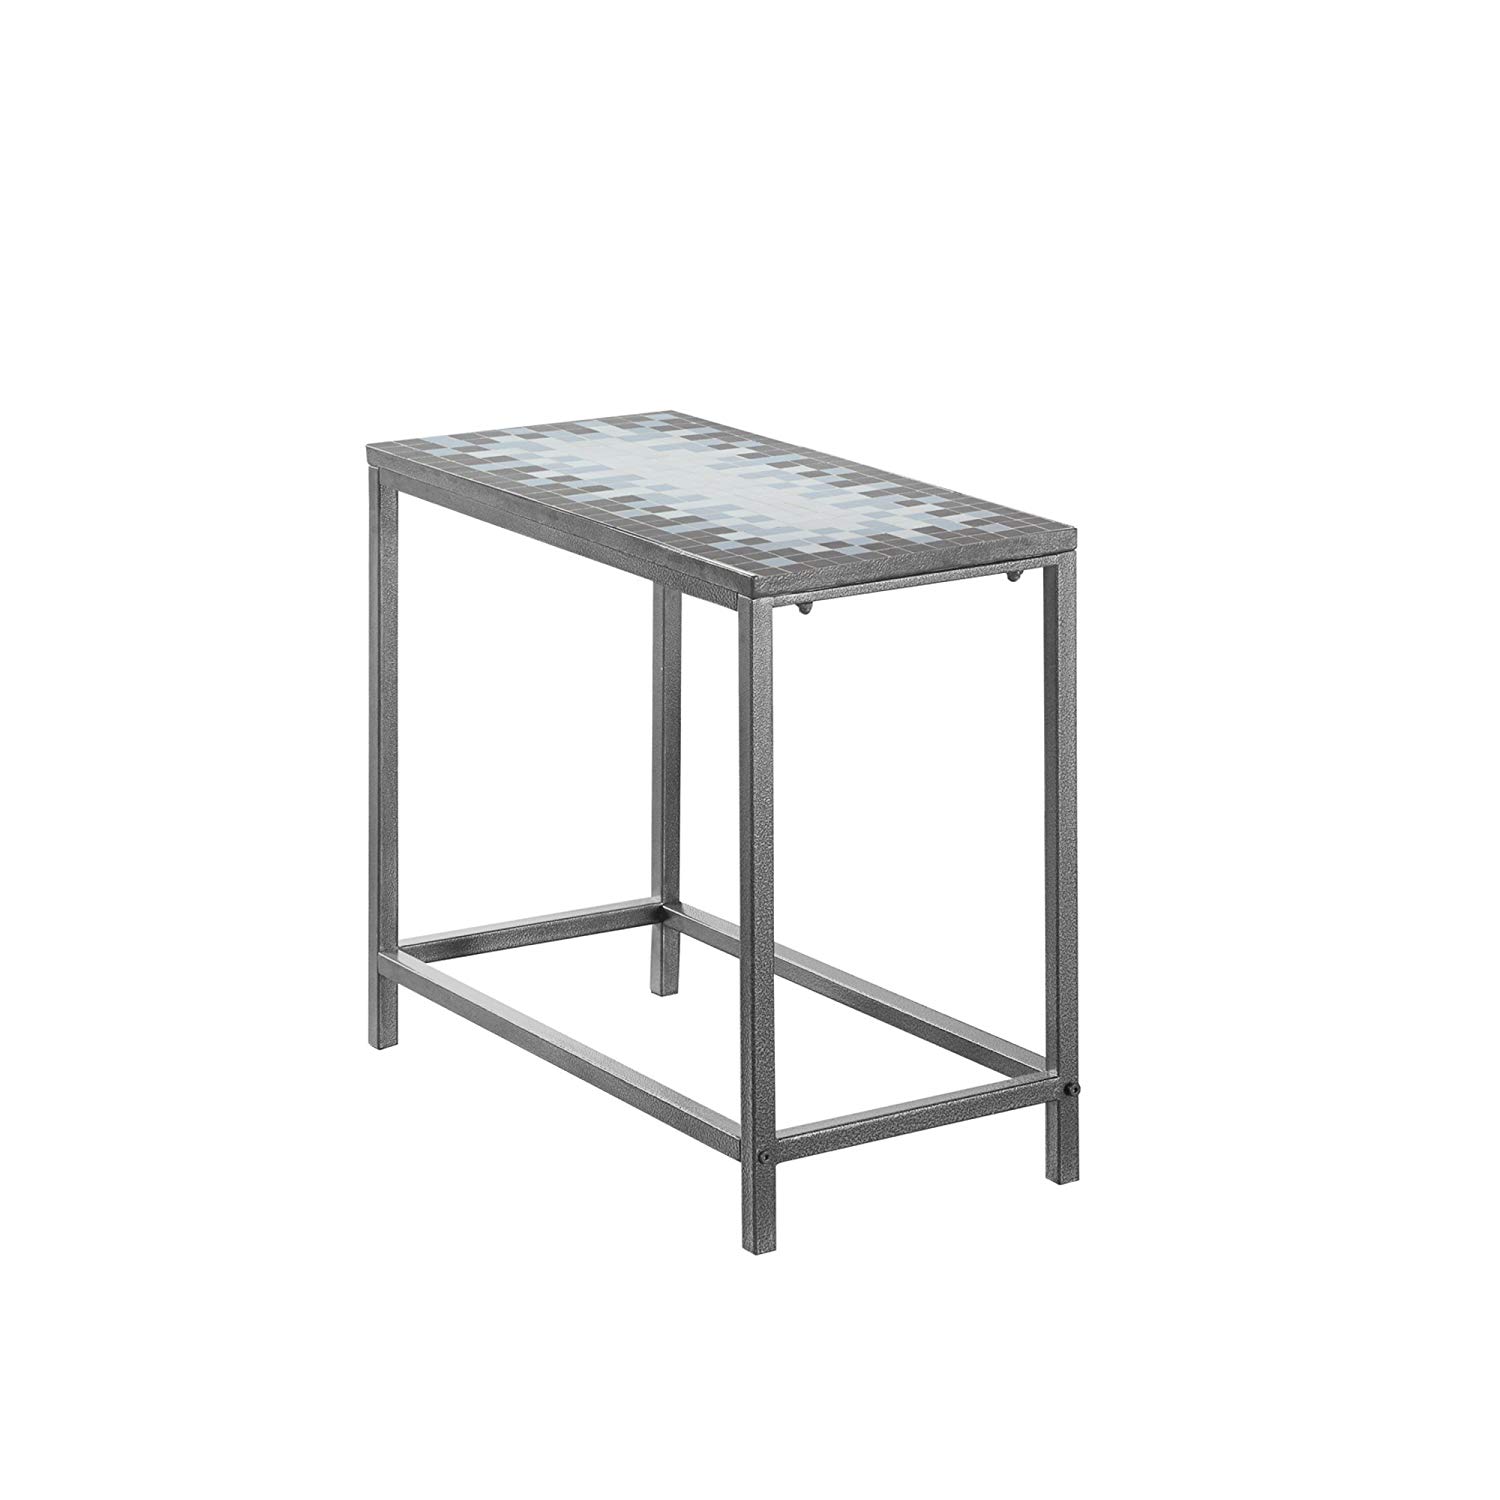 candace basil accent table grey blue tile top silver metal hammered kitchen dining ikea cube storage boxes wine stoppers target wood nightstand small oak glass sofa pool umbrella